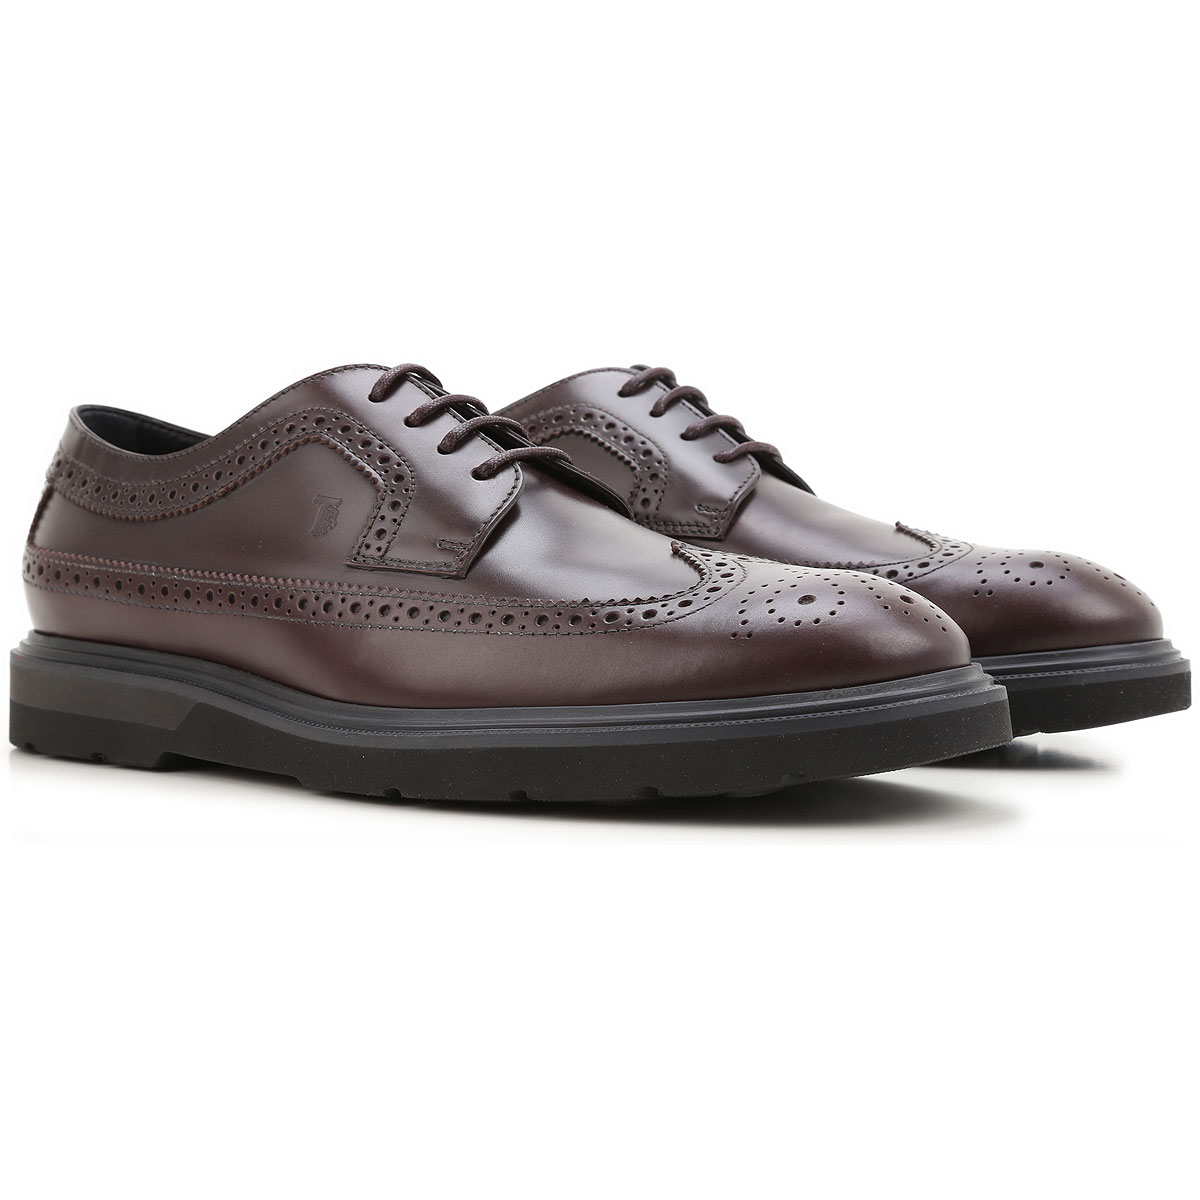 Tod's Chaussure Brogue , Bordeaux, Cuir, 2017, 39.5 41 42 42.5 43 44.5